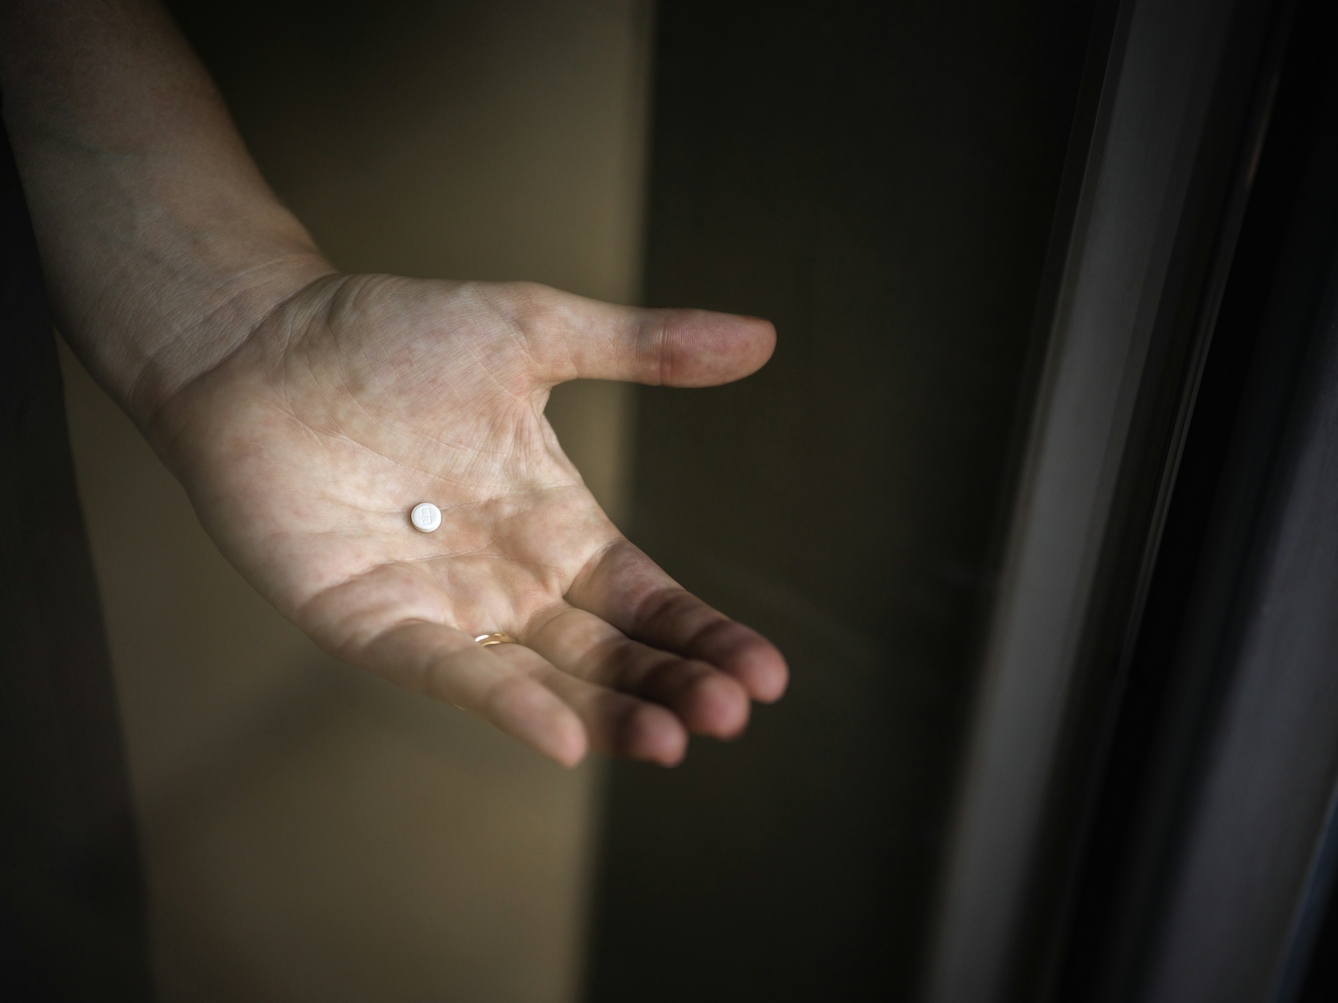 Photograph of a woman’s hand holding an immunosuppressant prescription tablet, captured through a window.  The marking on the tablet looks like the letter G in lower case or the number 9.  There is a slight reflection in the window.